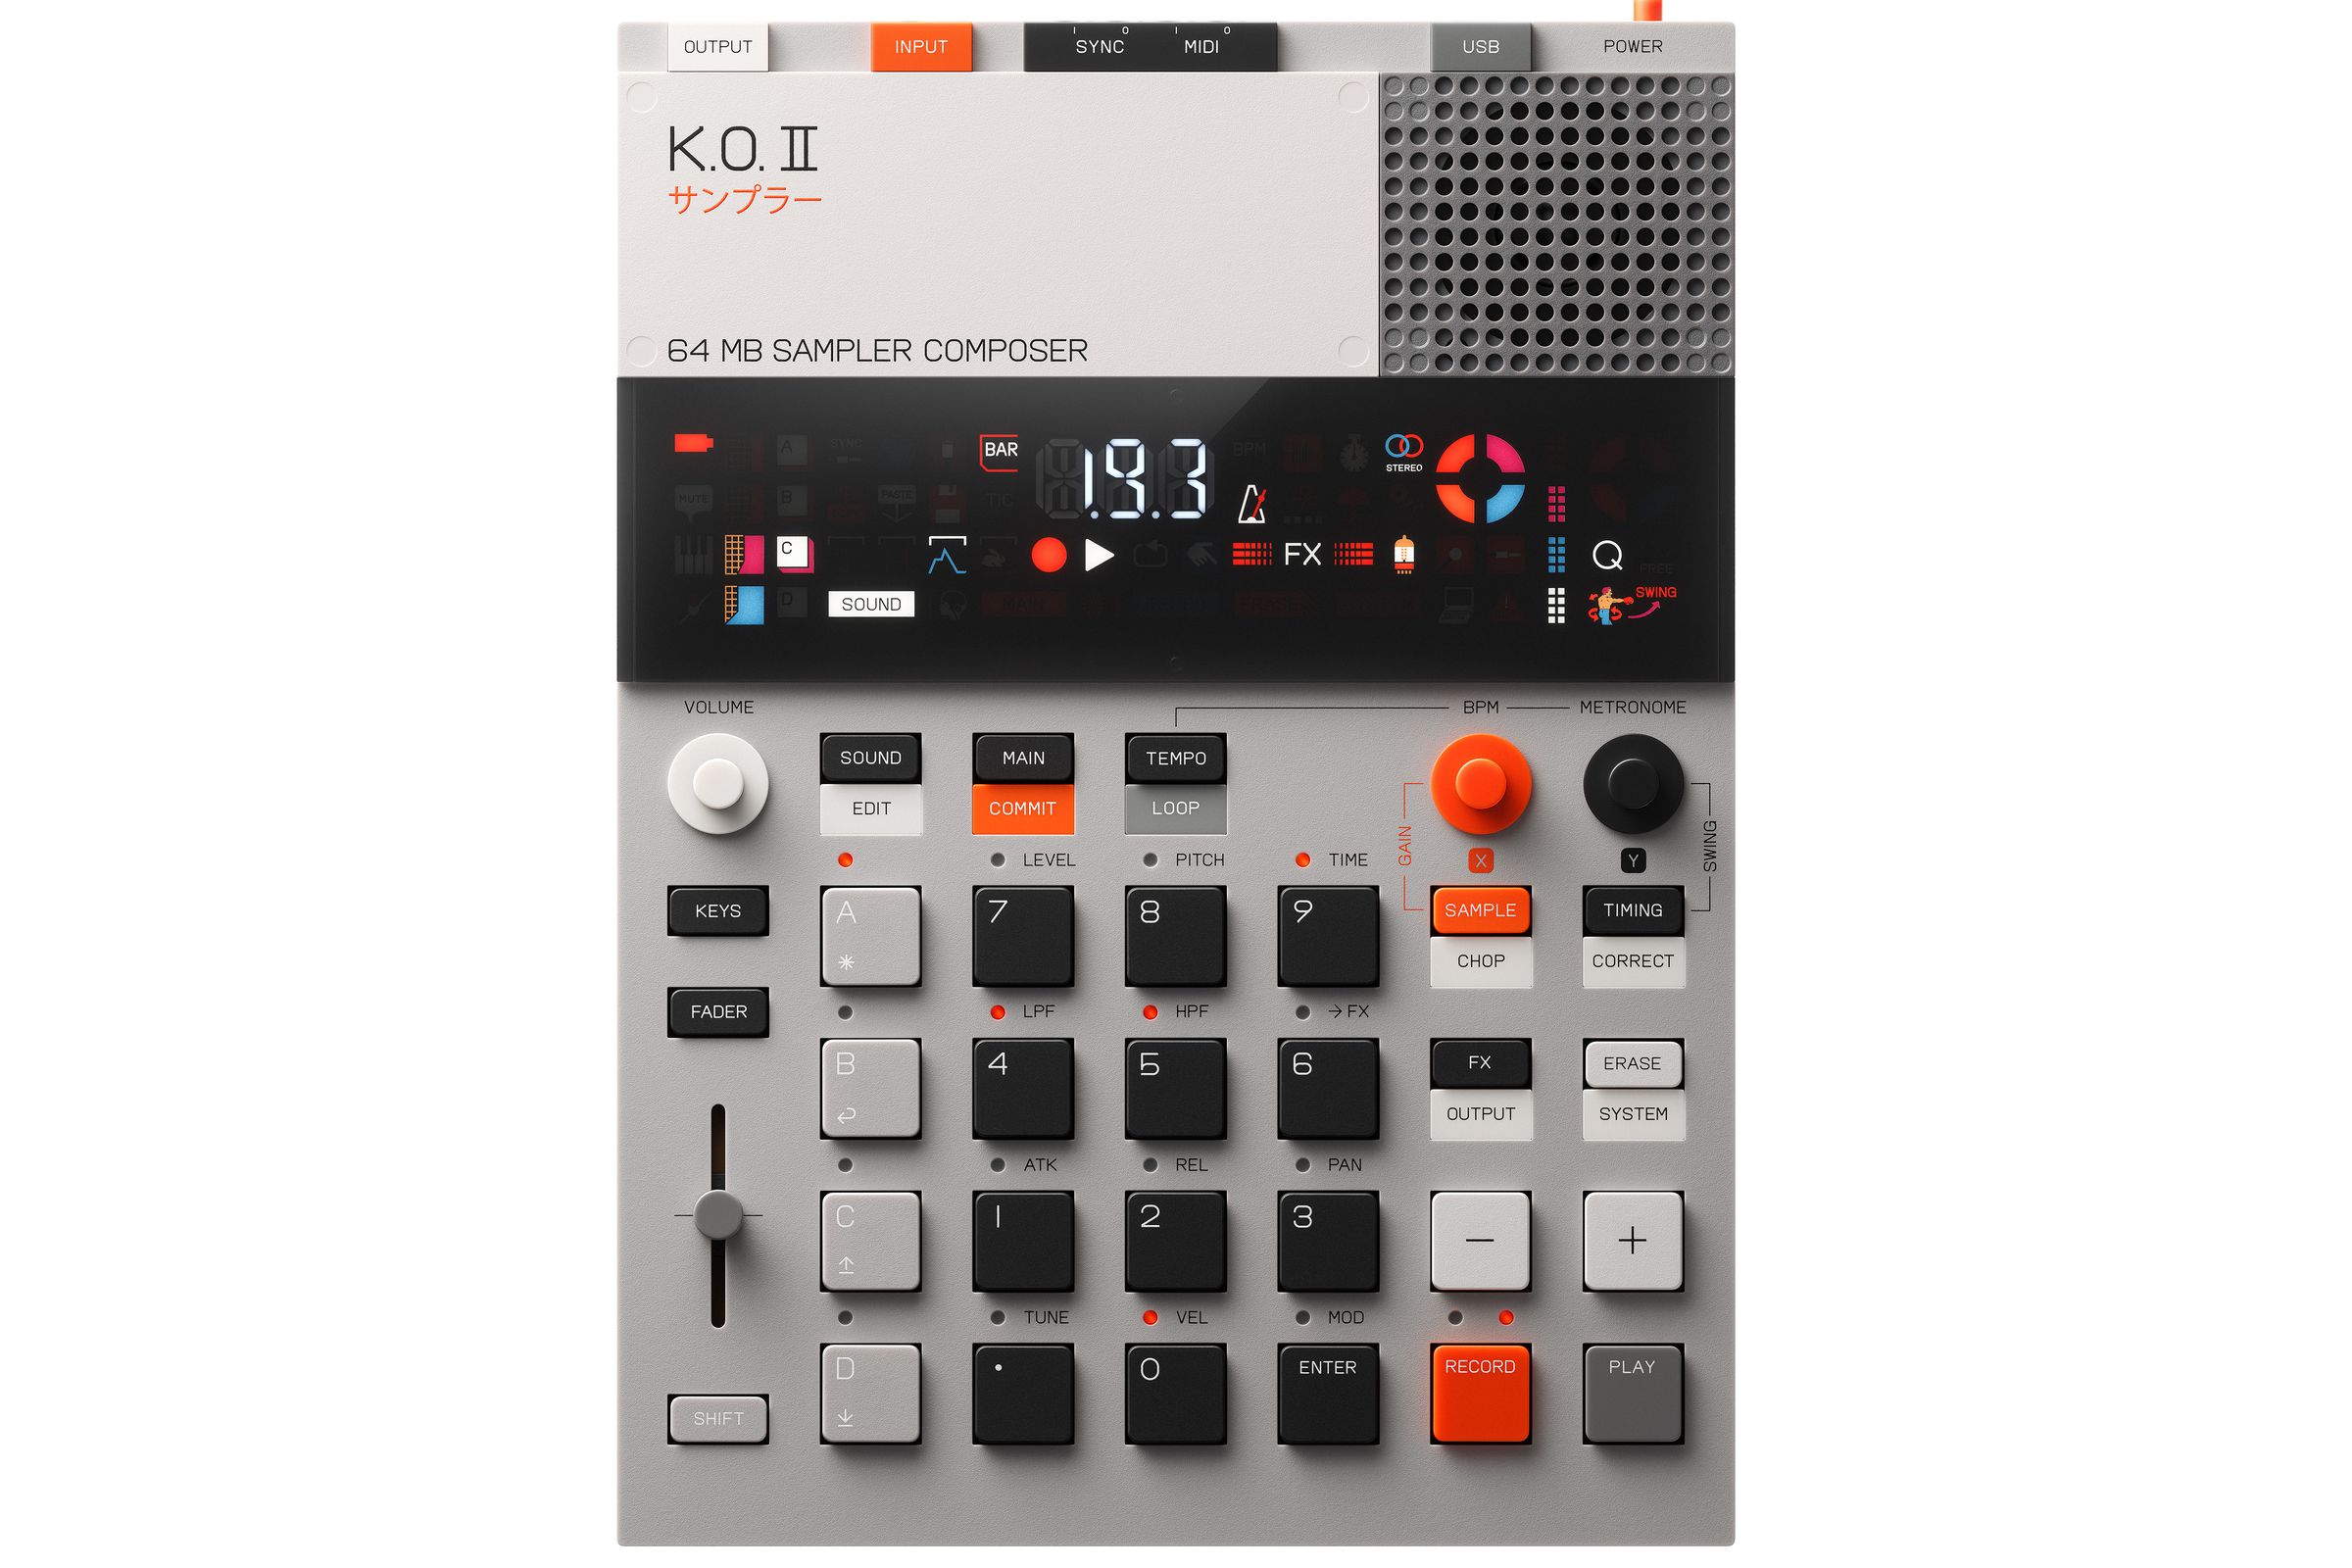 A picture of the EP-133 KO II, a gray and white and orange synthesizer.

Teenage Engineering’s new synthesizer is powerful, portable, and gorgeous